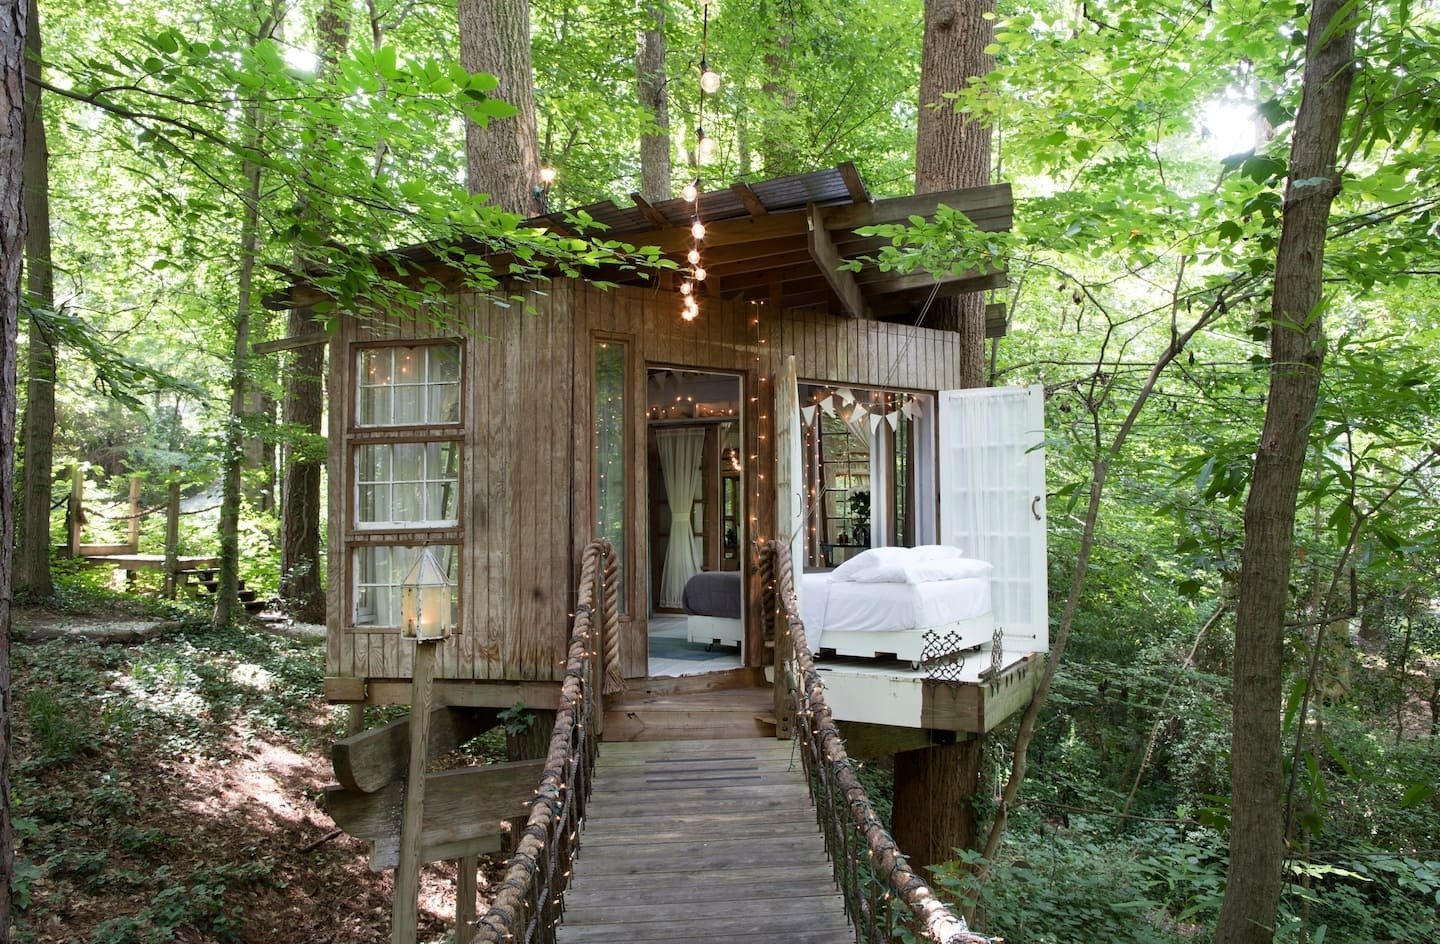 22 Tiny Homes You Can Rent on Airbnb for an Autumn Getaway